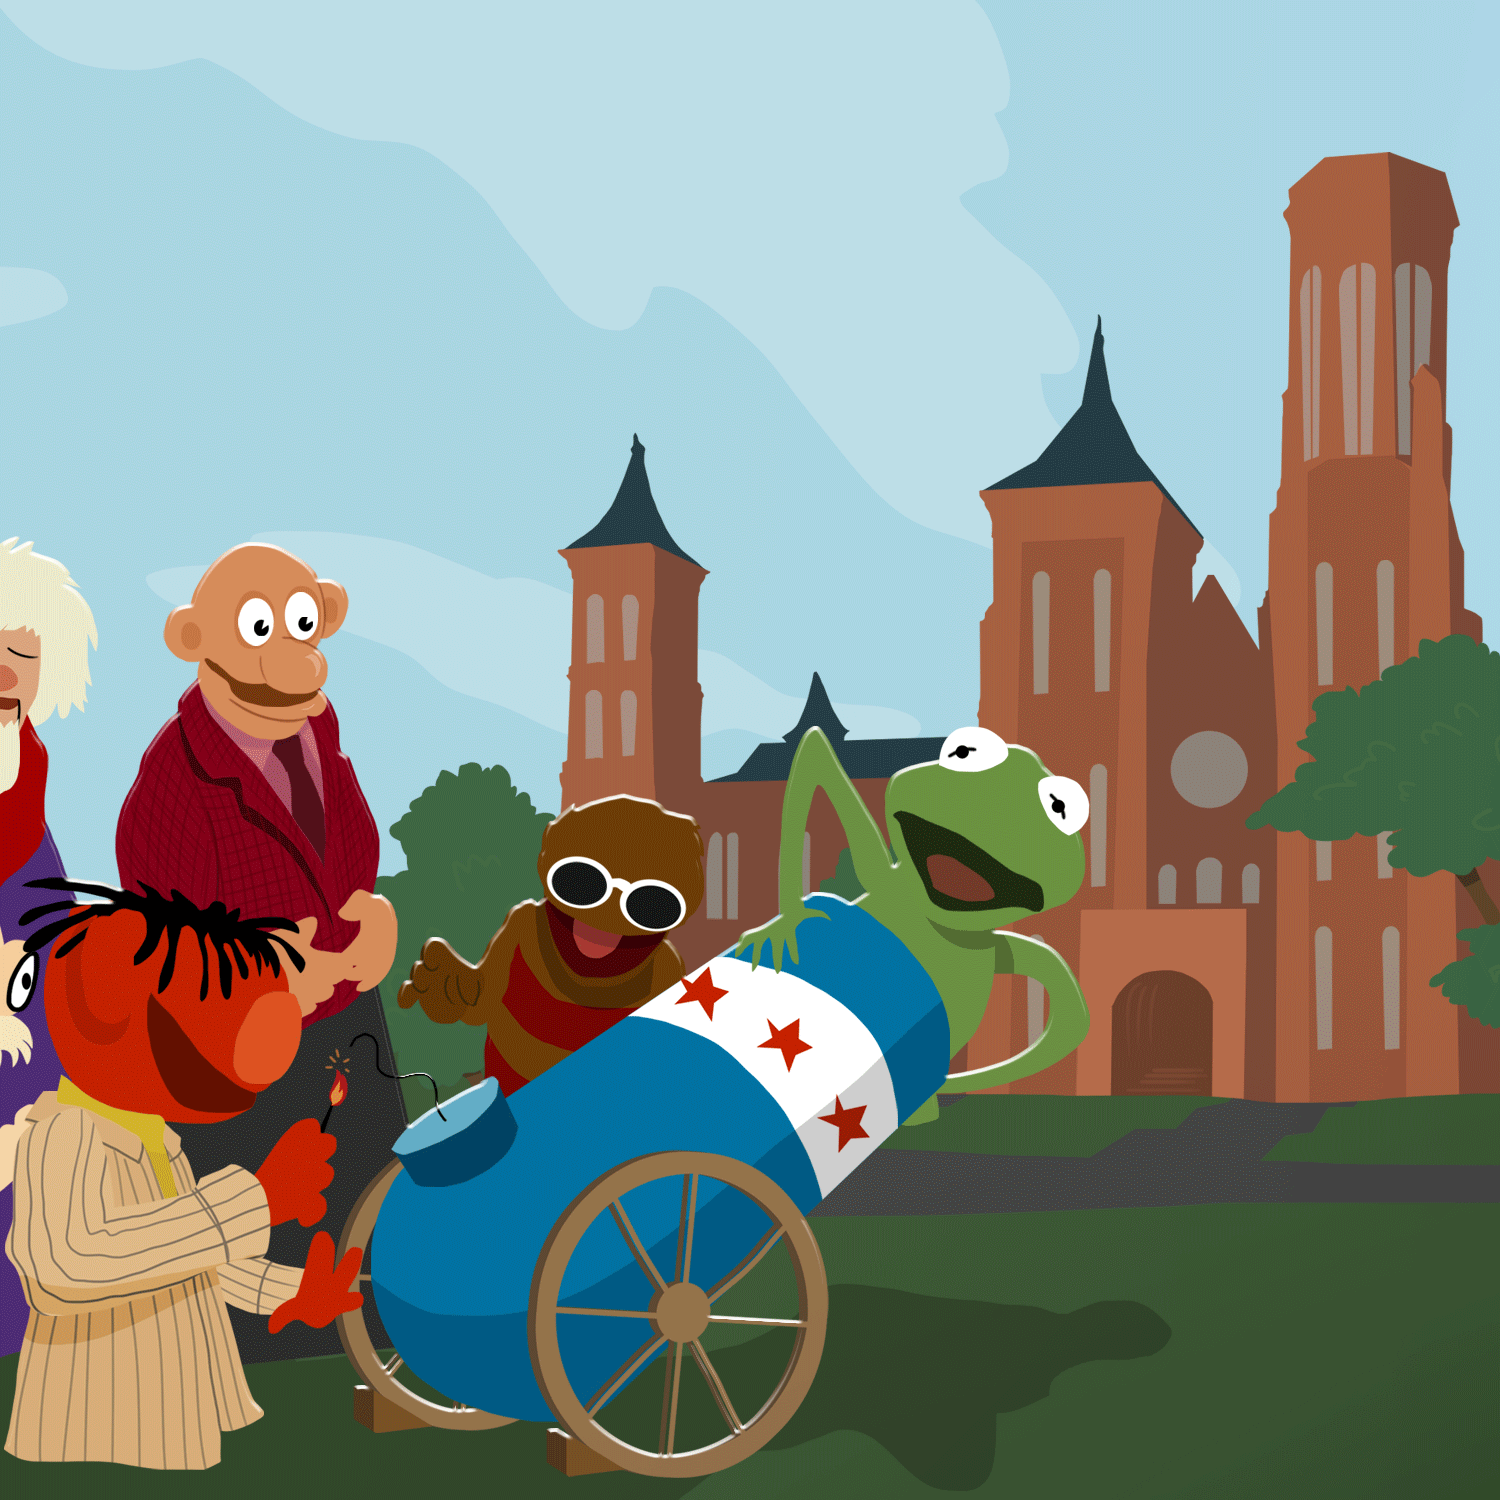 The ’Gentle Anarchy’ of the Muppets